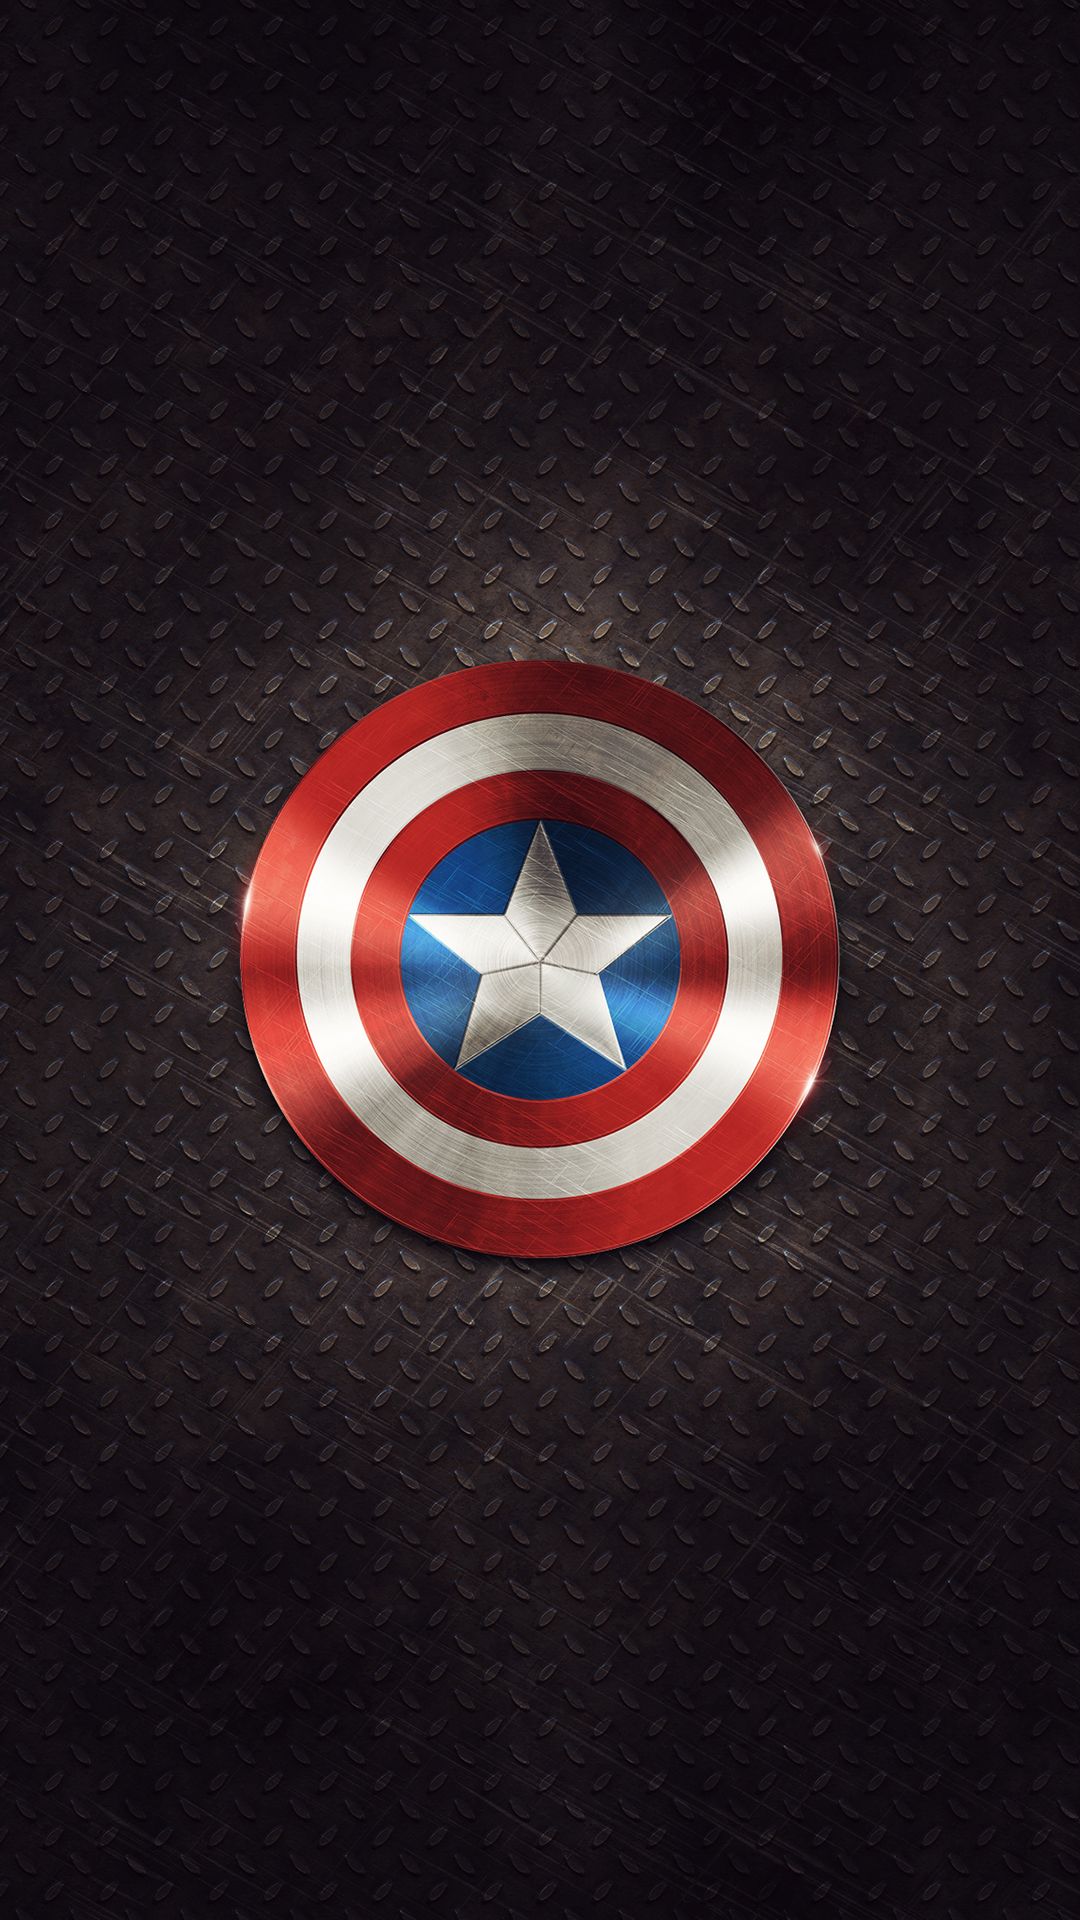 Captain America Shield Android Wallpaper free download